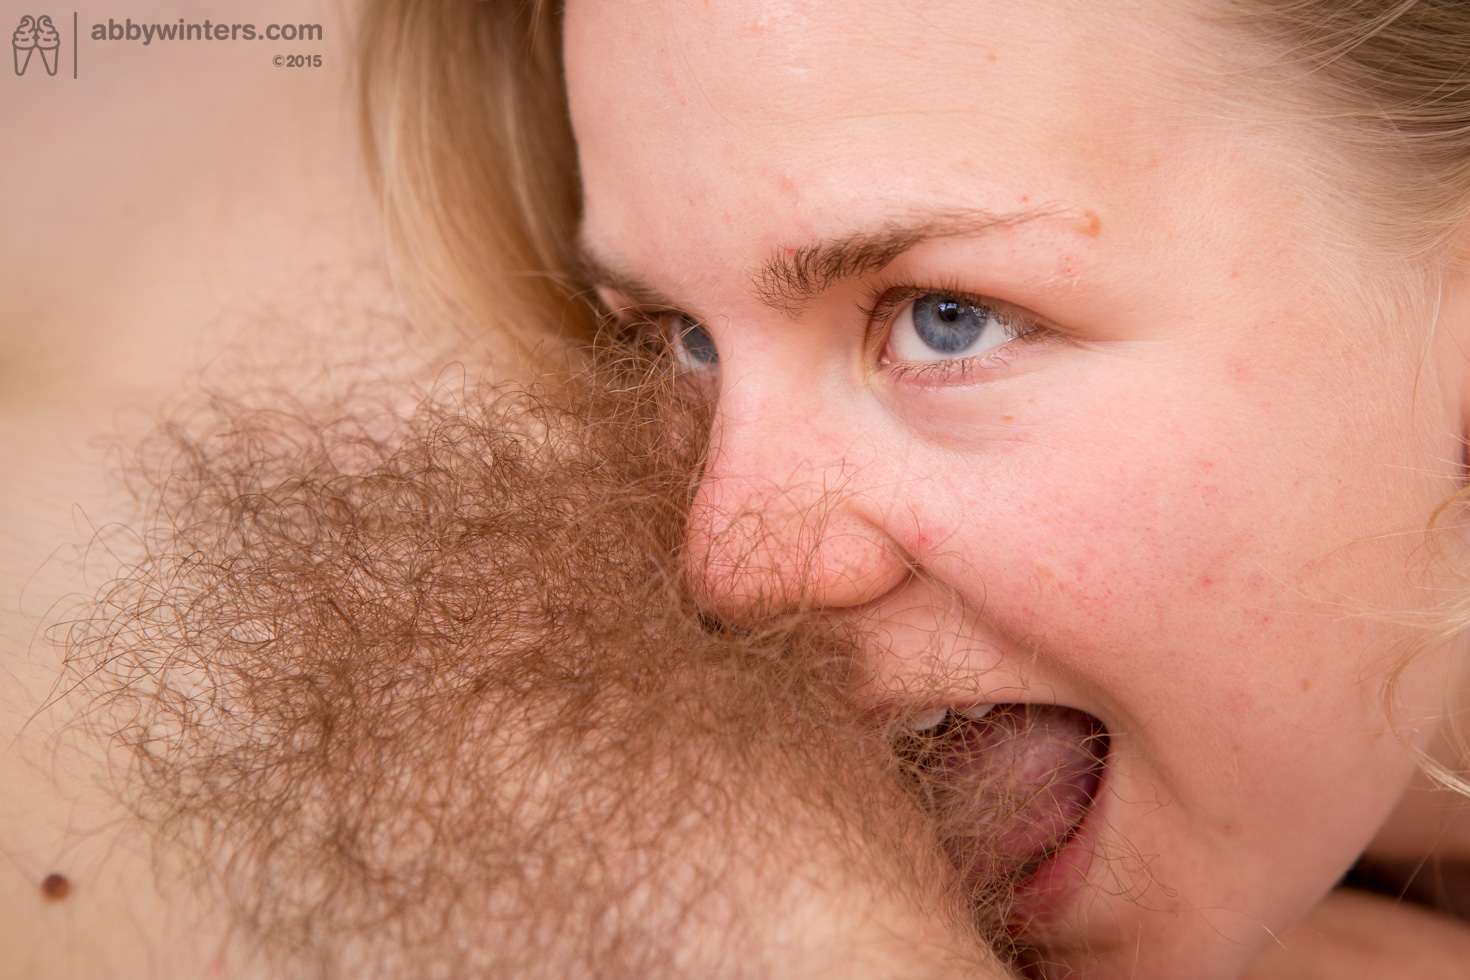 1470px x 980px - Fisting hairy pussy | The Hairy Lady Blog